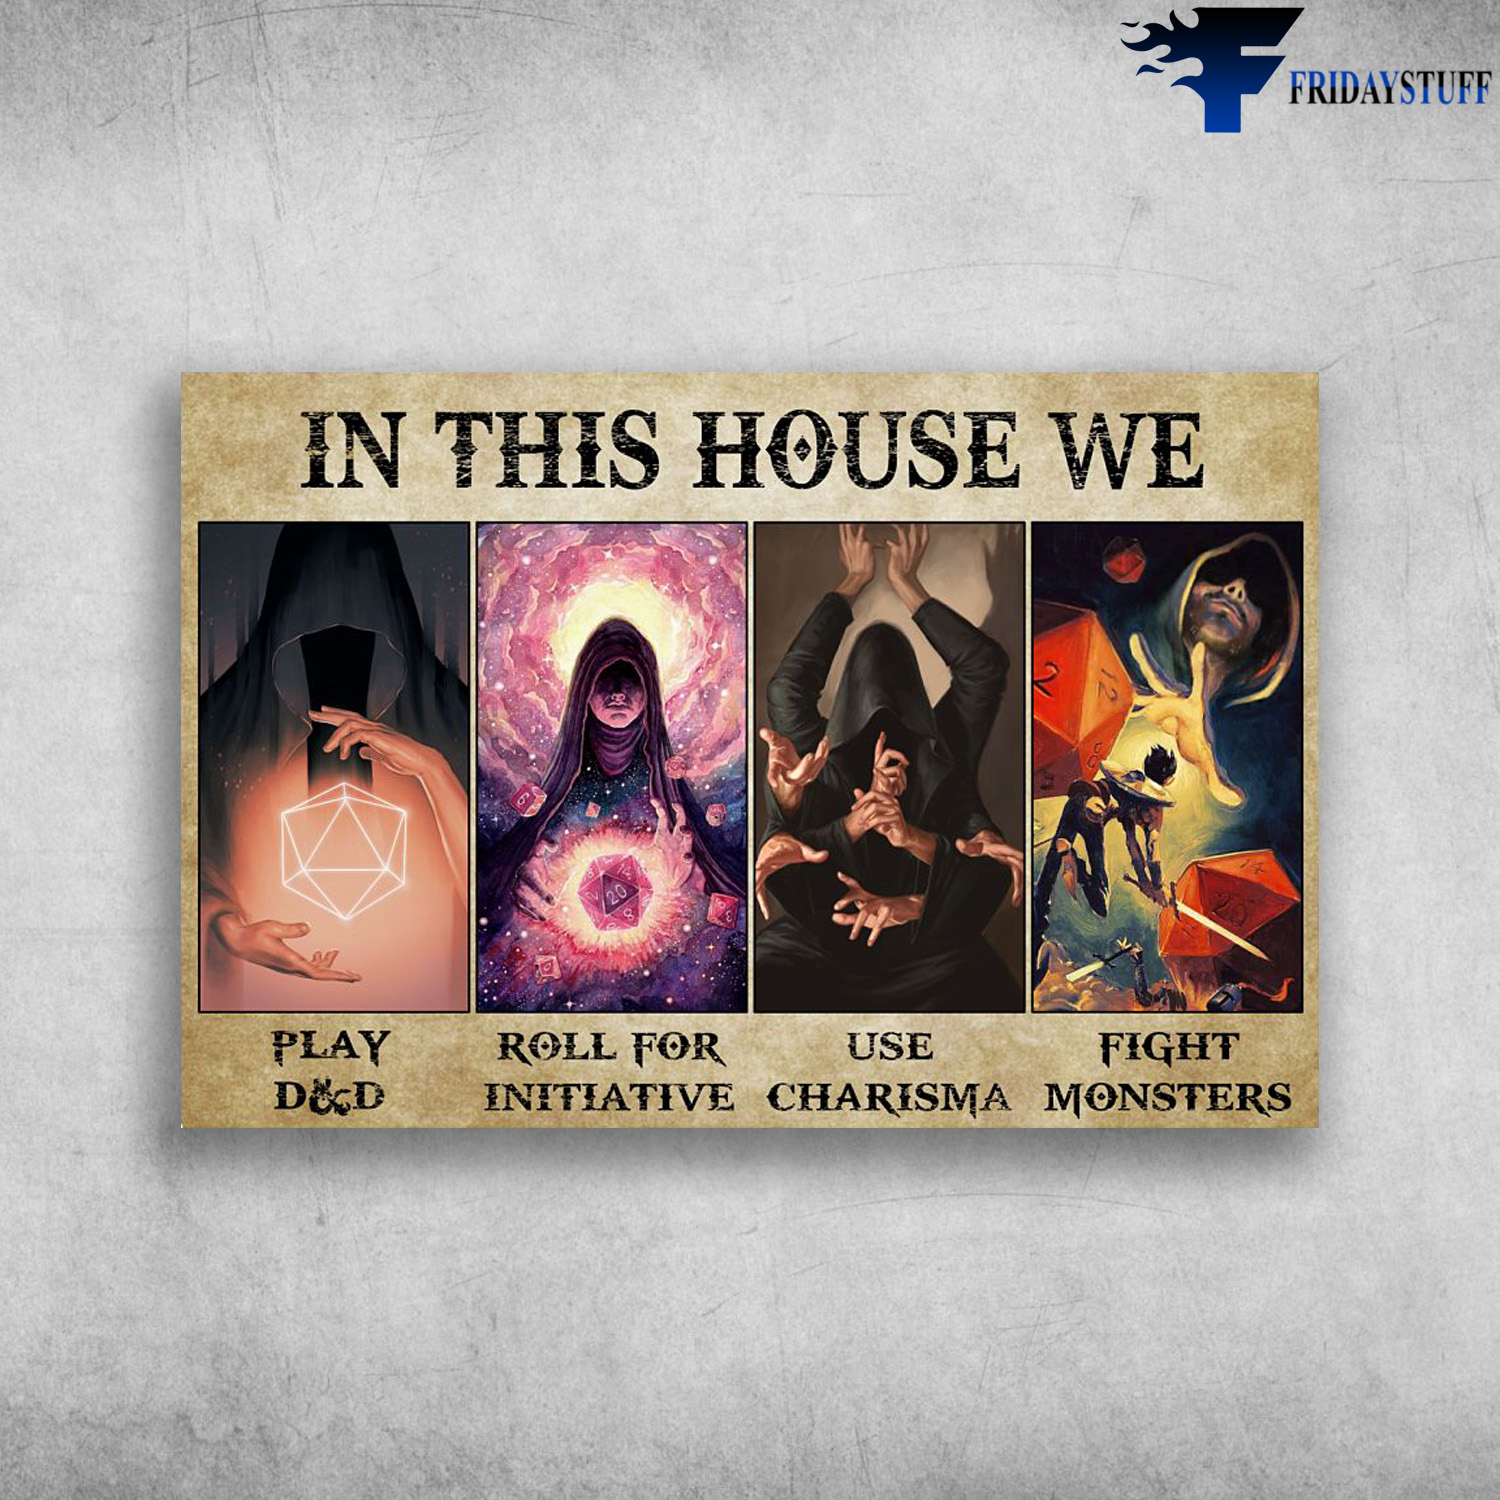 The Game - In This House, We Play DnD, Roll For Initiative, Use Charisma, Fight Monsters